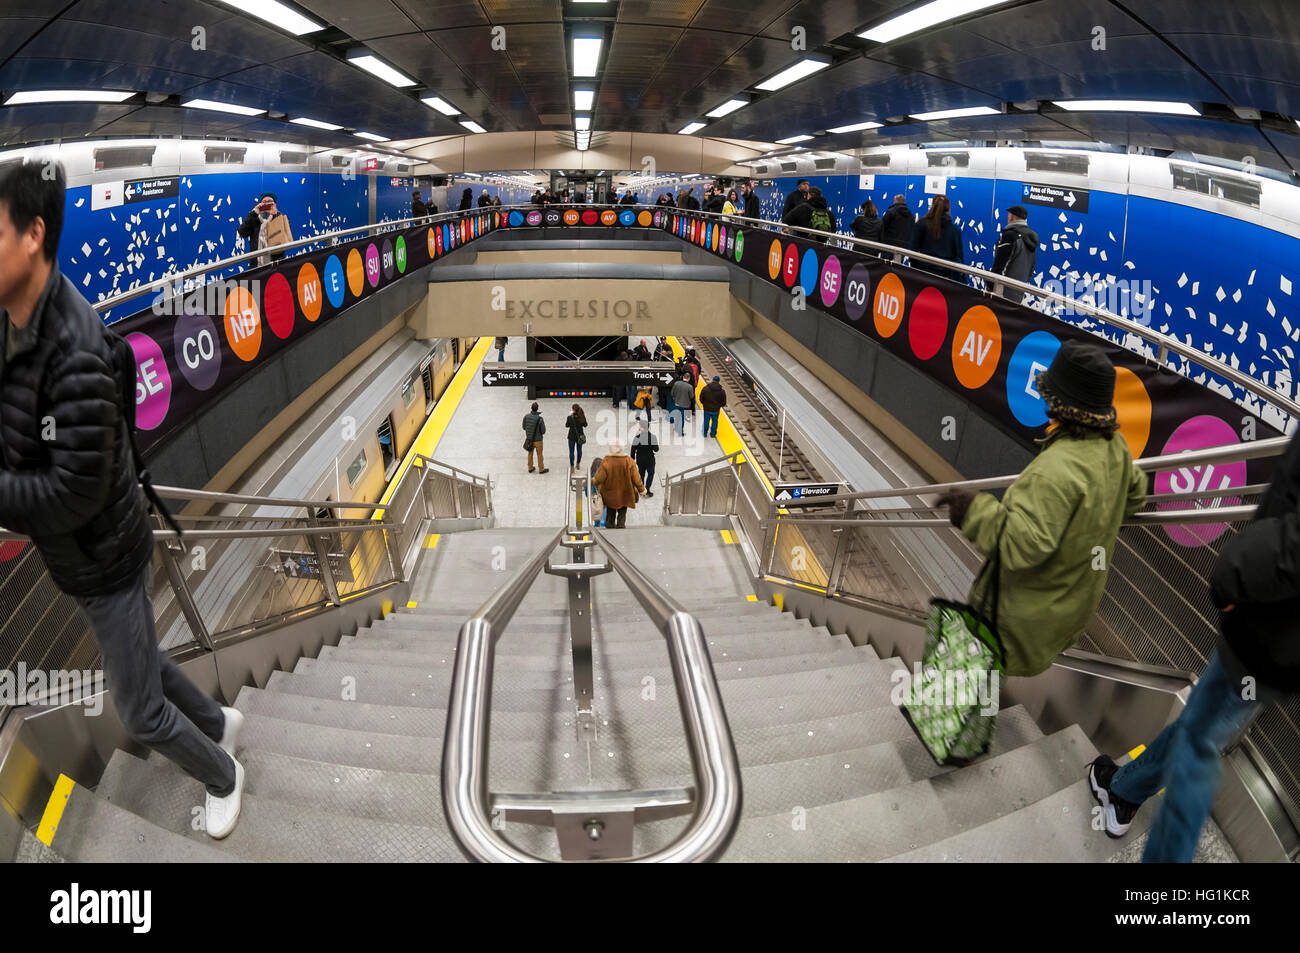 New York, USA 1 January 2017 - After nearly a century of planning, the Second Avenue Subway finally opened to the public on New Years Day. Three new stations, at 72nd, 86th and 96th streets, plus an extension at East 63rd were added to the BMT and line at a cost og 4.4 billion dollars. The new state of the art subway line runs along BMT lines from East 96th St to Brighton Beach, Brooklyn. ©Stacy Walsh Rosenstock Stock Photo